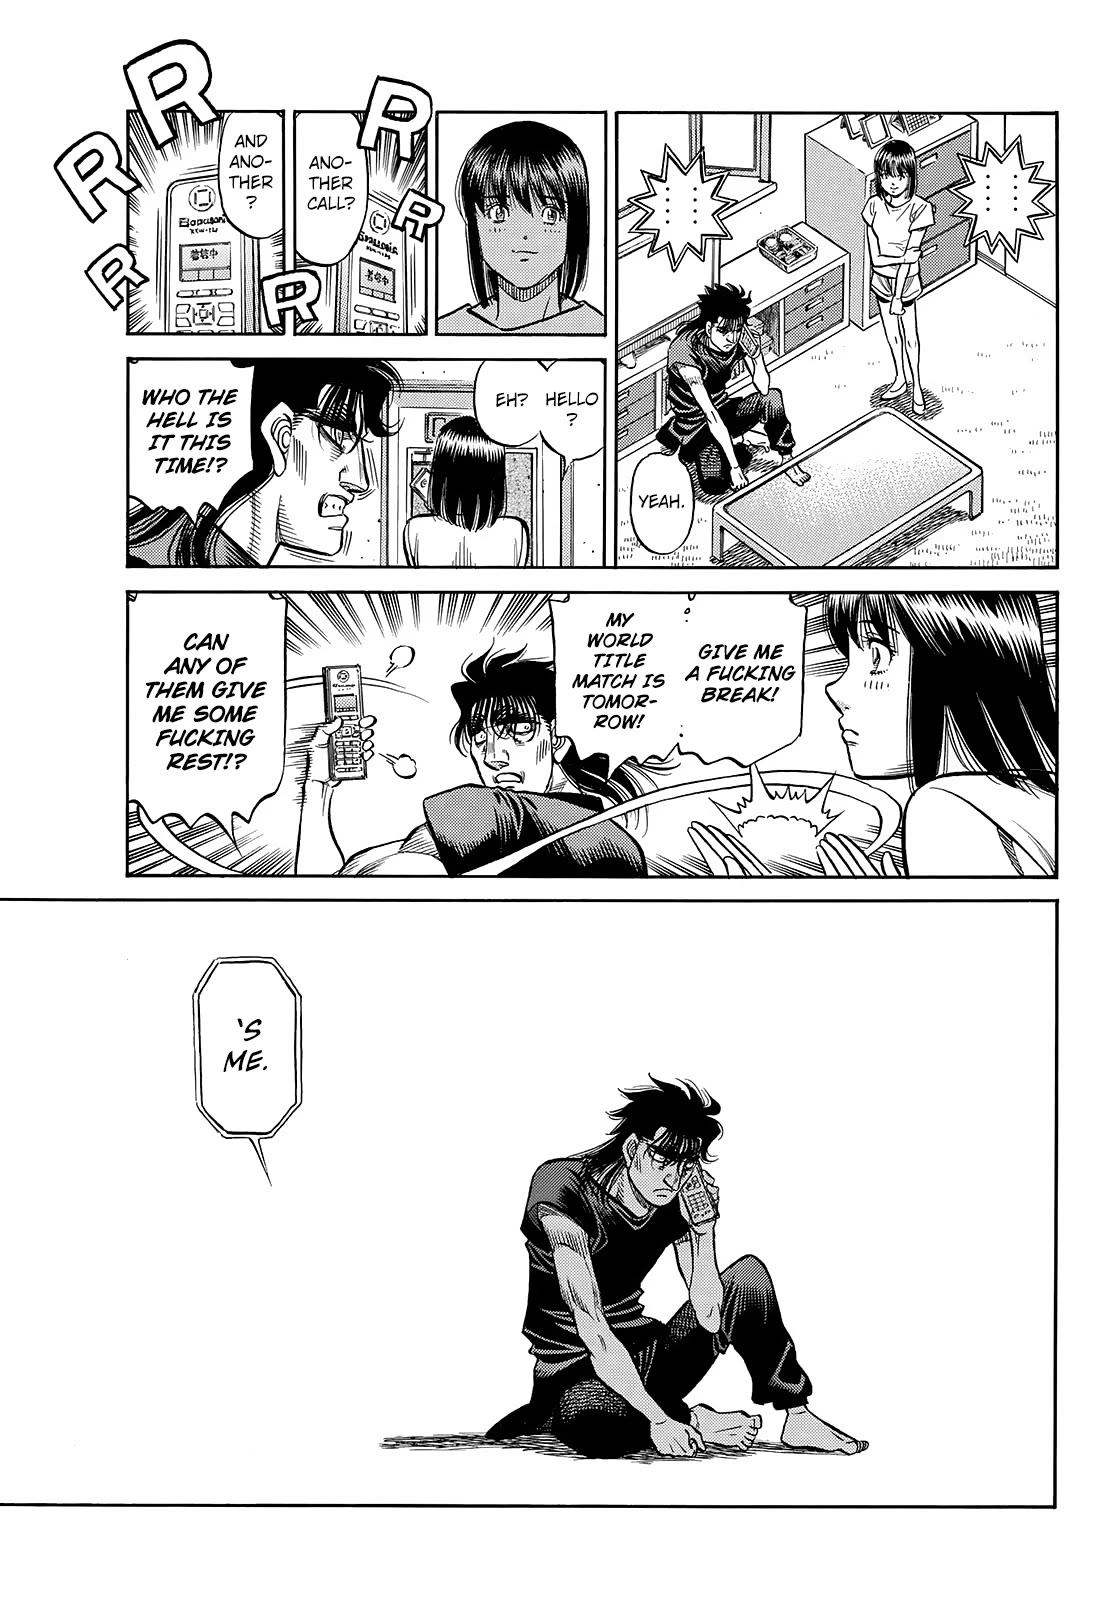 Hajime no Ippo, Chapter 1448 Encouragement on the Eve of image 10